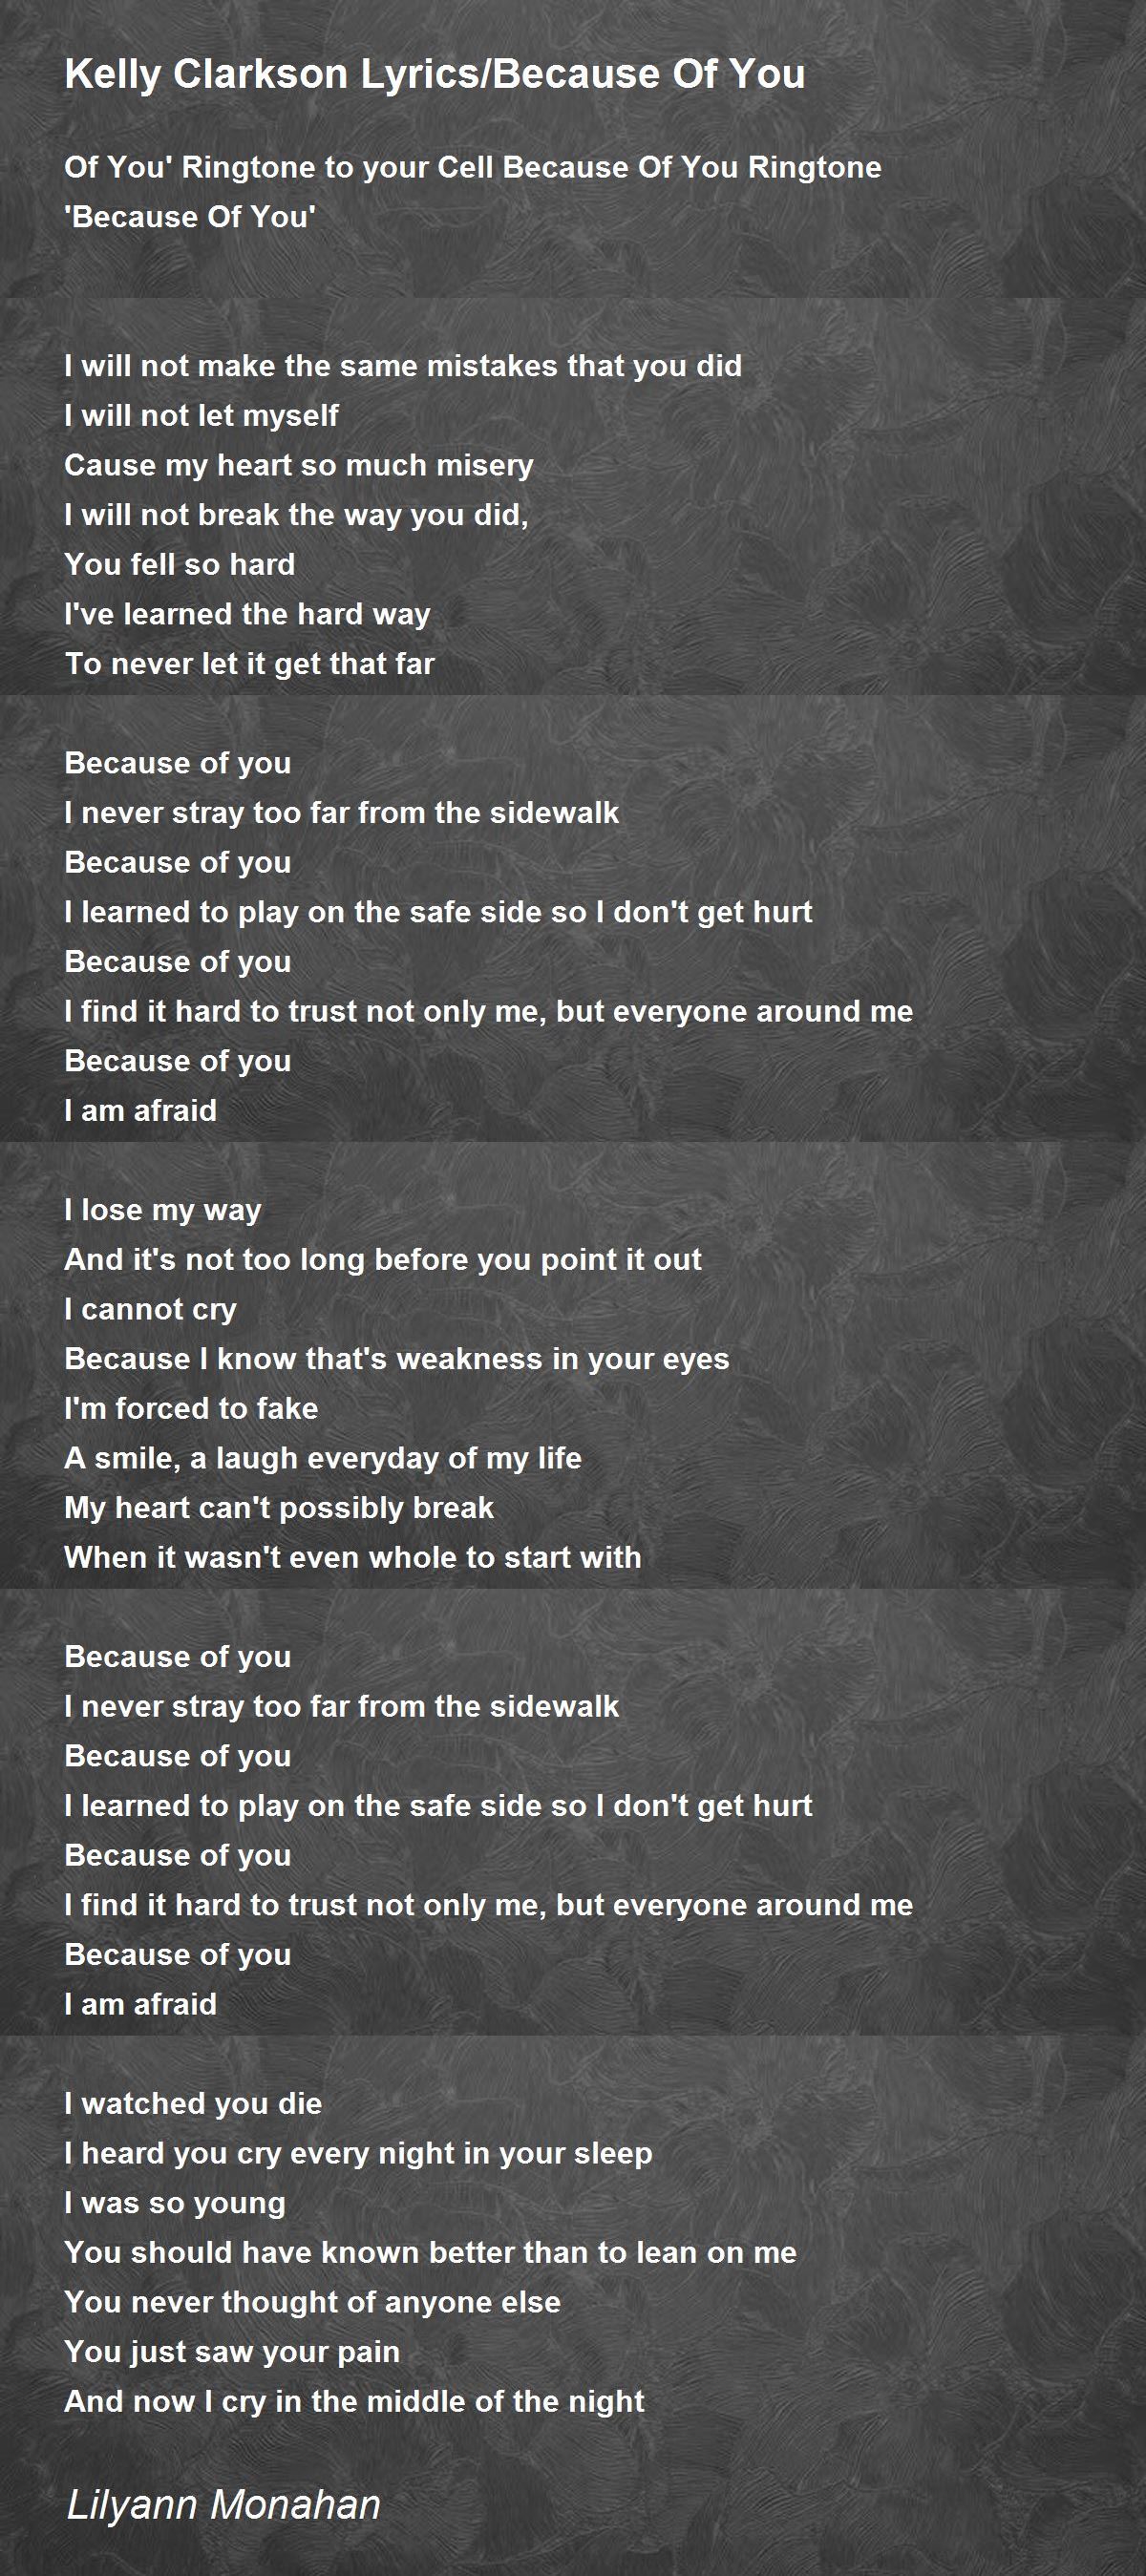 Because Of You - Because Of You Poem by Derryn Whitaker